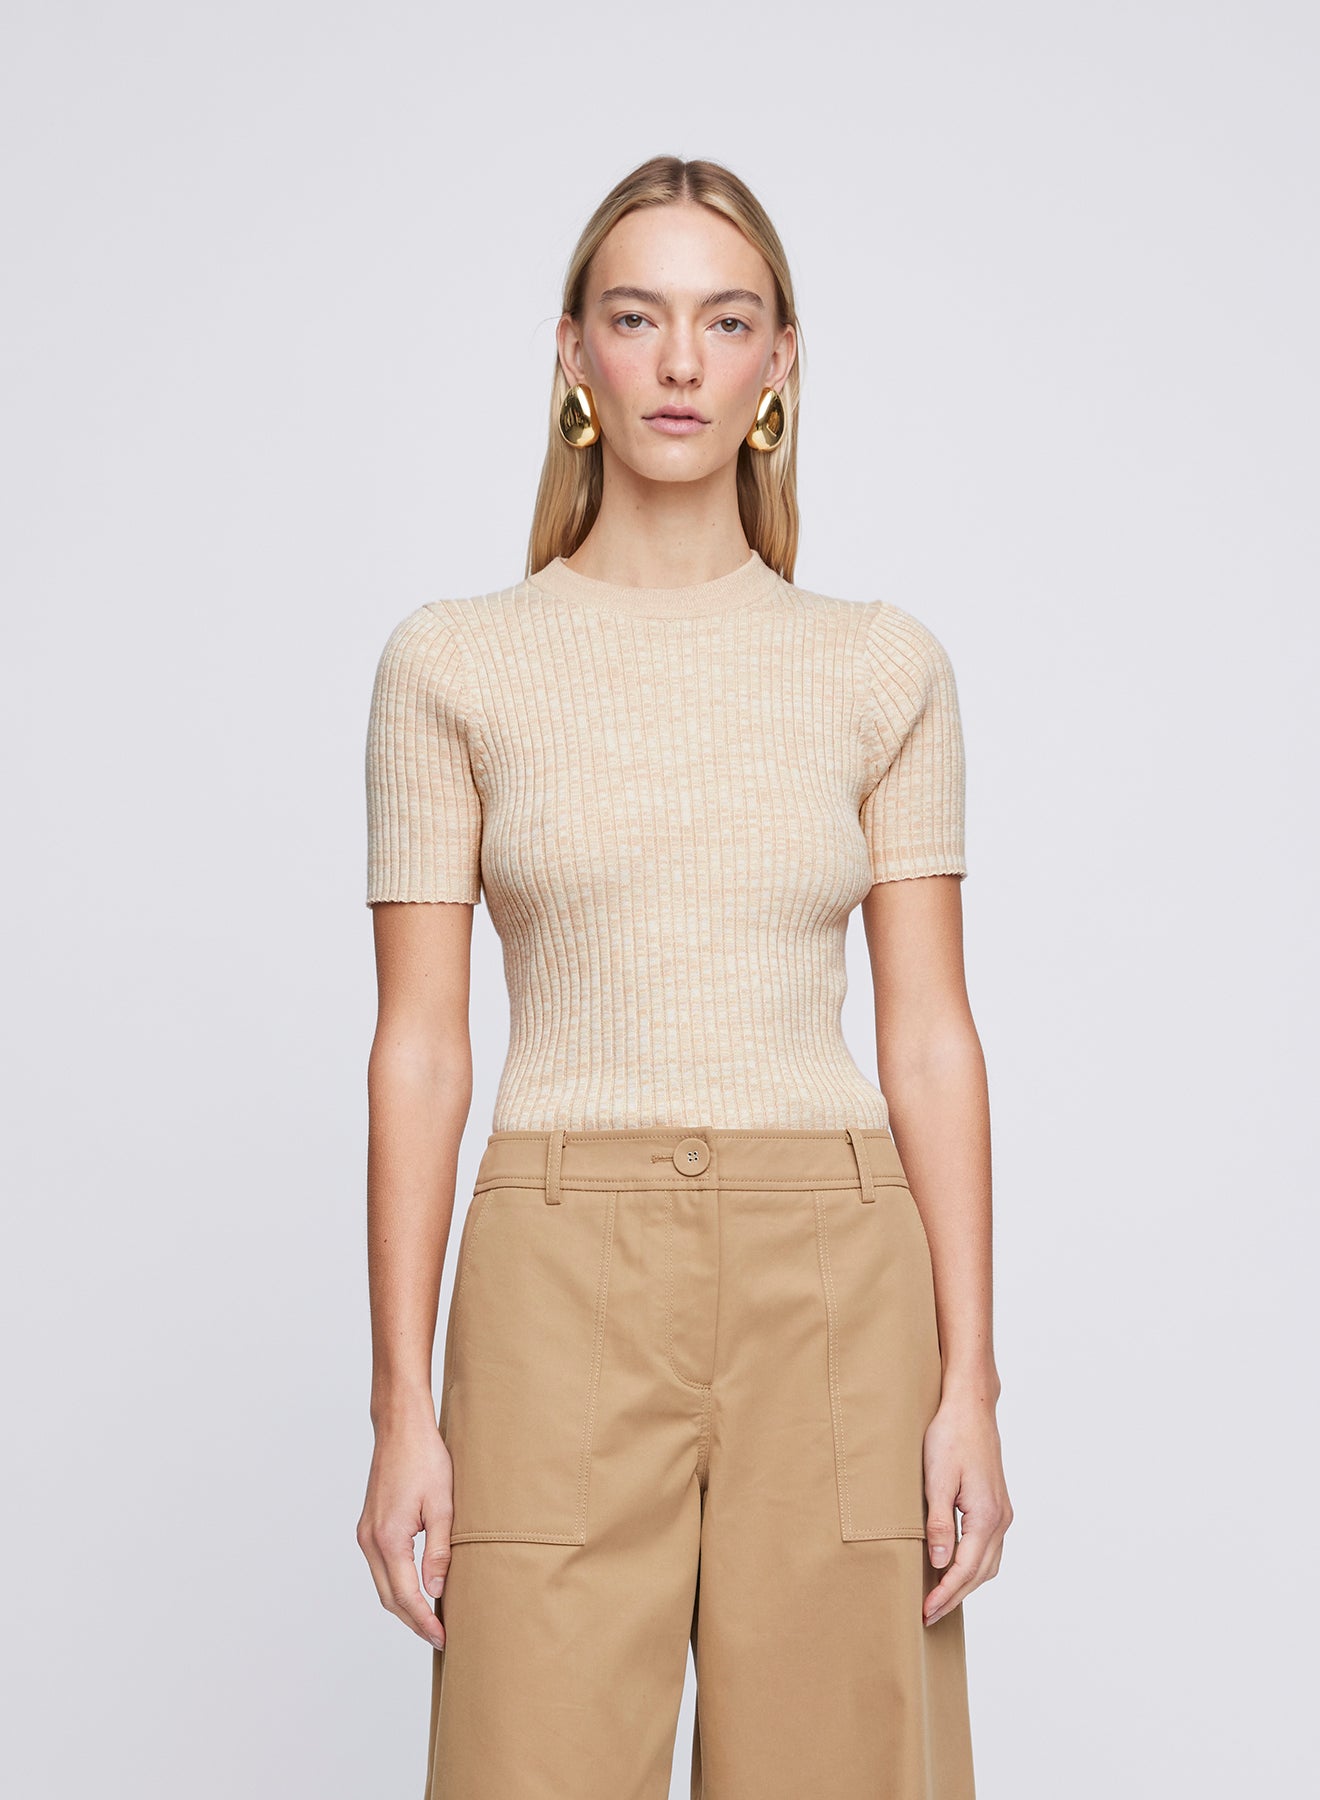 The Anna Quan Bebe Top in Sand Dune is an essential 100% cotton ribbed knit top with a crew neckline and subtle contrast trim.